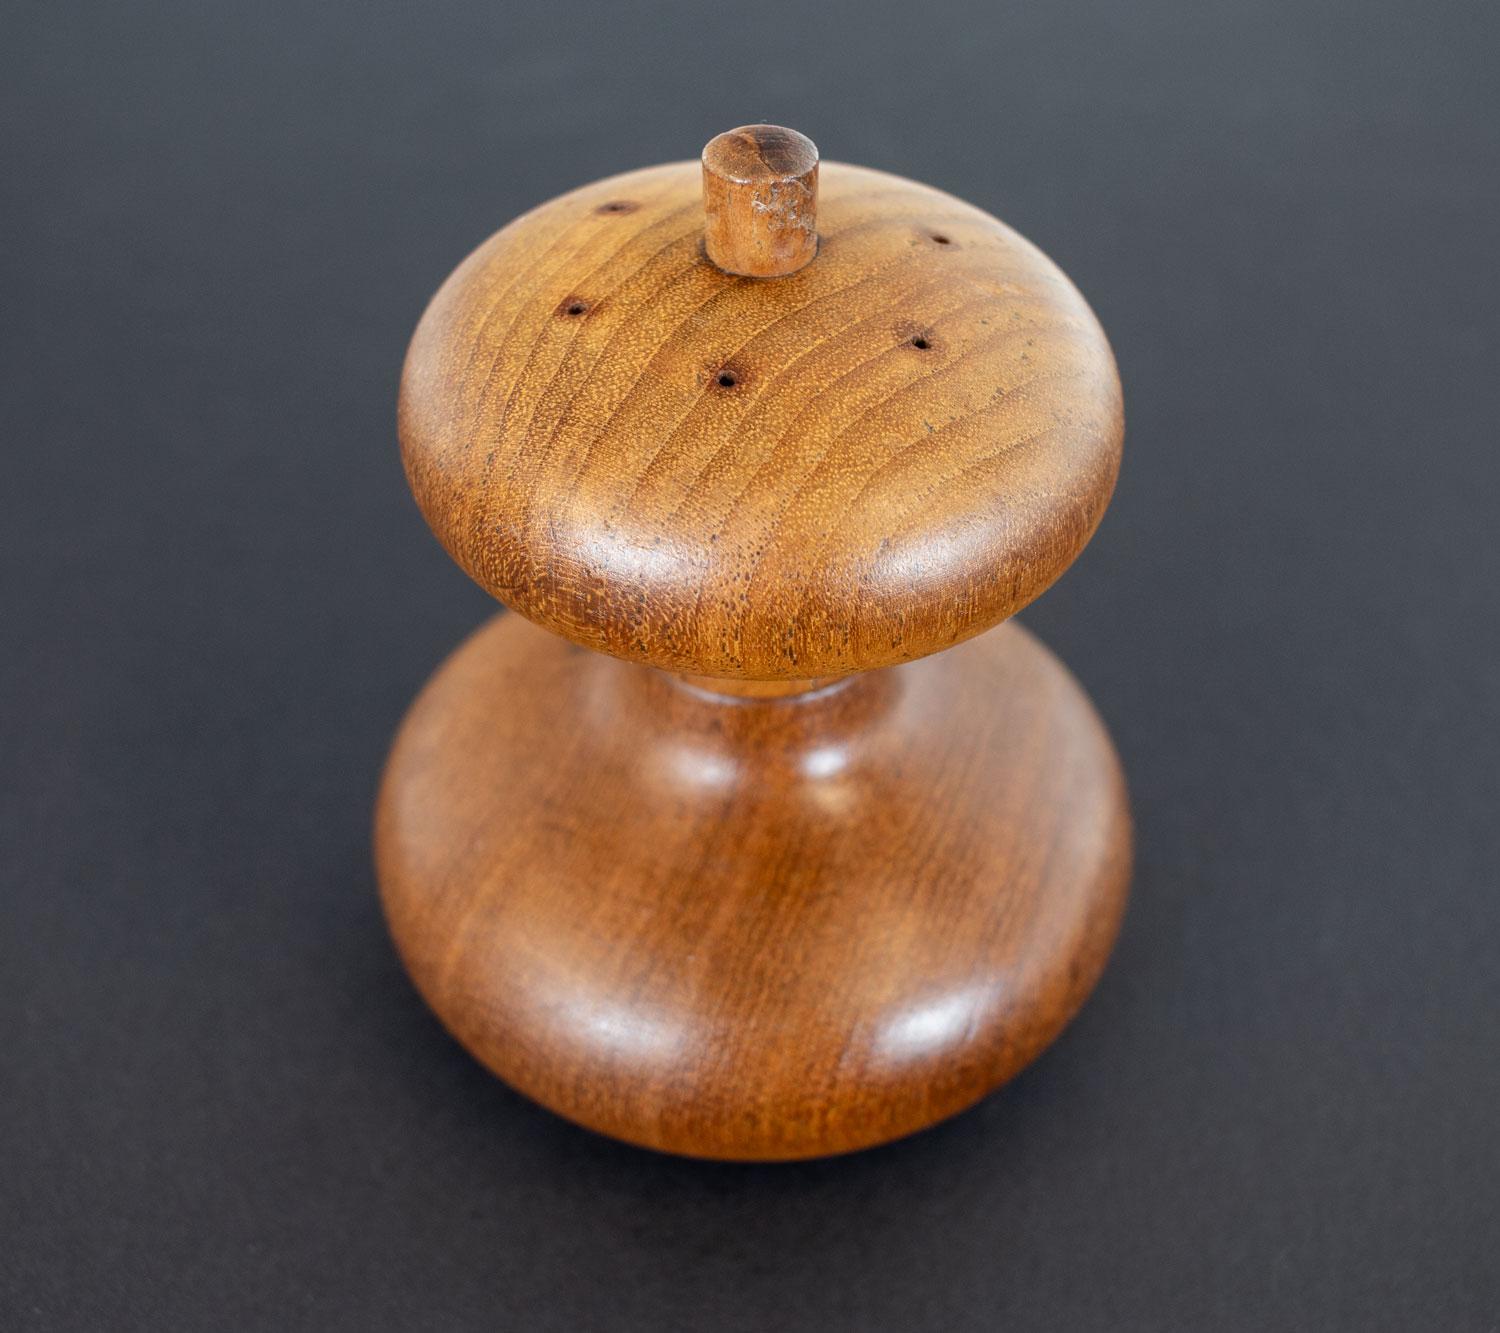 Teak pepper mill and salt pot designed by Jens Quistgaard, a Danish sculptor and industrial designer, in the late 1950s for Dansk Designs. This is model 822 which is an hour glass shape with the pepper grinder at the bottom and salt dispenser at top